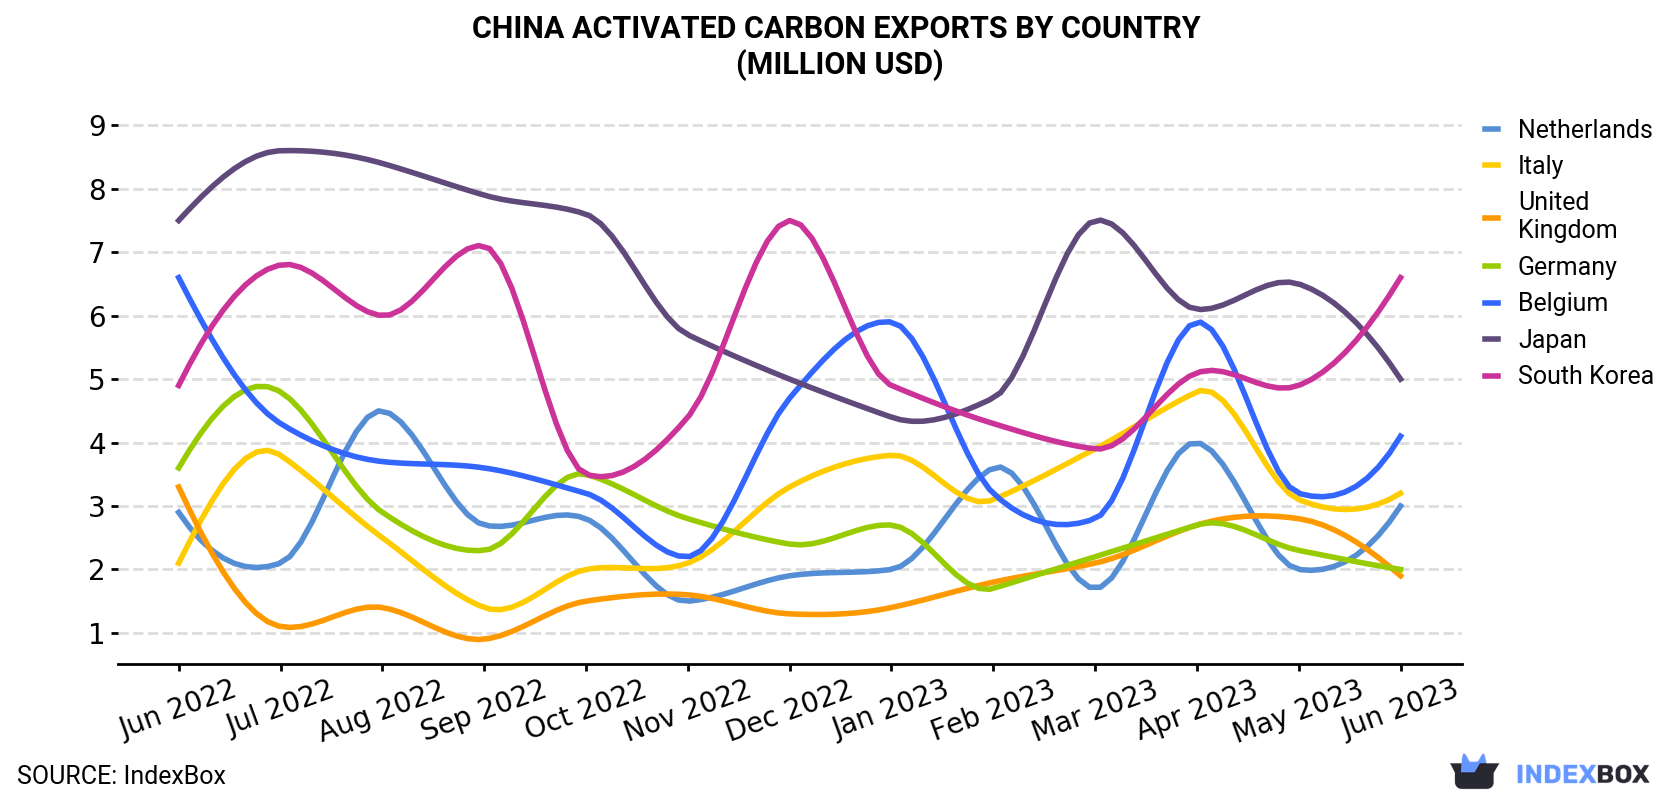 China Activated Carbon Exports By Country (Million USD)